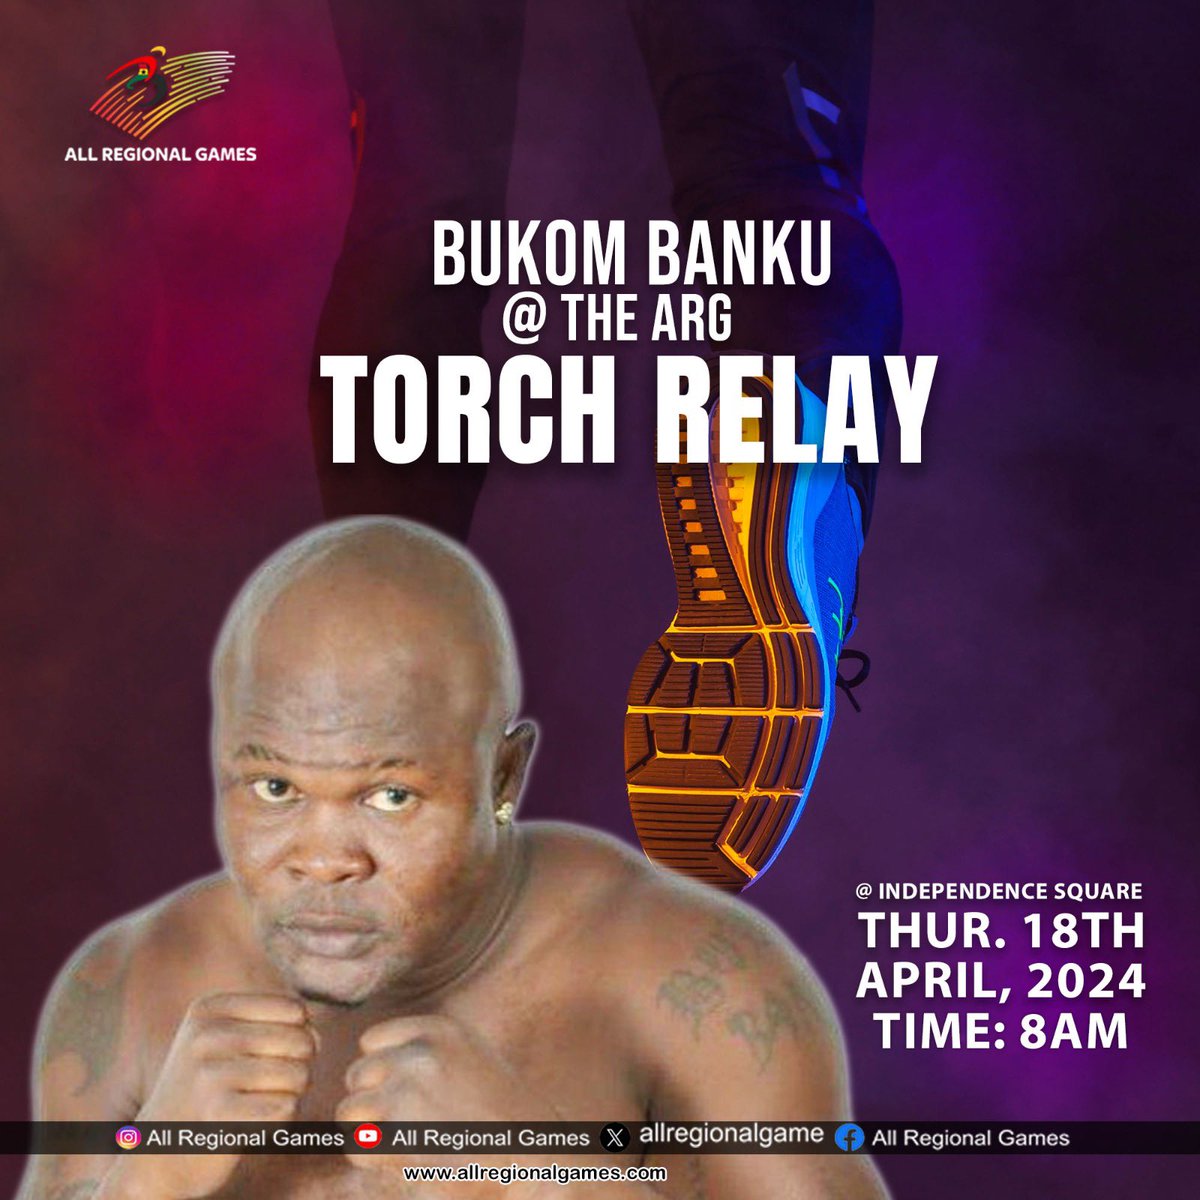 The flame of competition is ignited! The ever supportive Bukuom will be at the All Regional Games torch relay float light up the streets tomorrow! #GetHype #TorchRelay #Ghana 🇬🇭